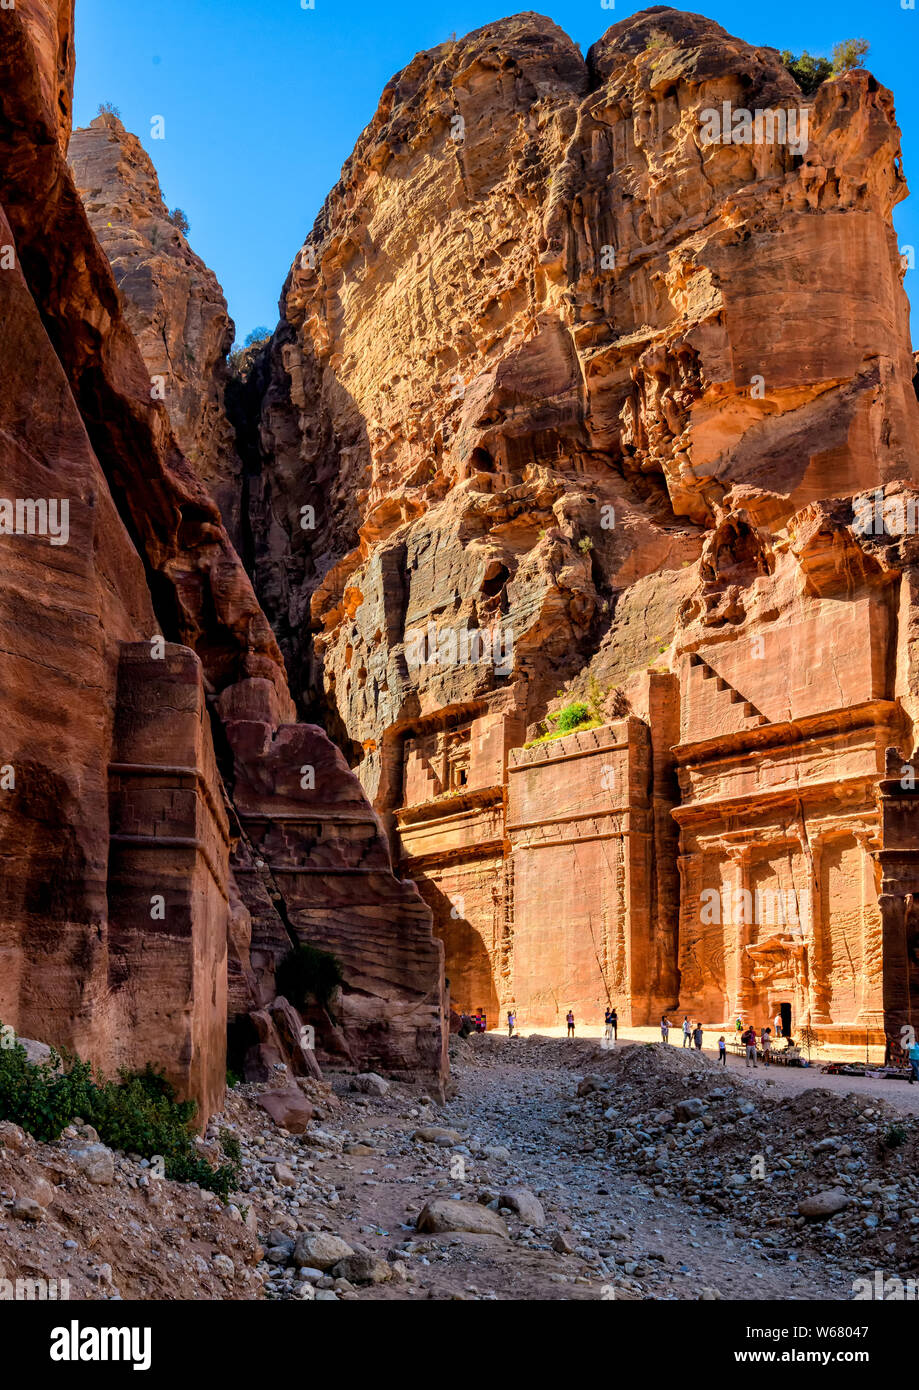 Some of the many tombs lining the red sandstone cliffs along the area known as the street of facades Stock Photo